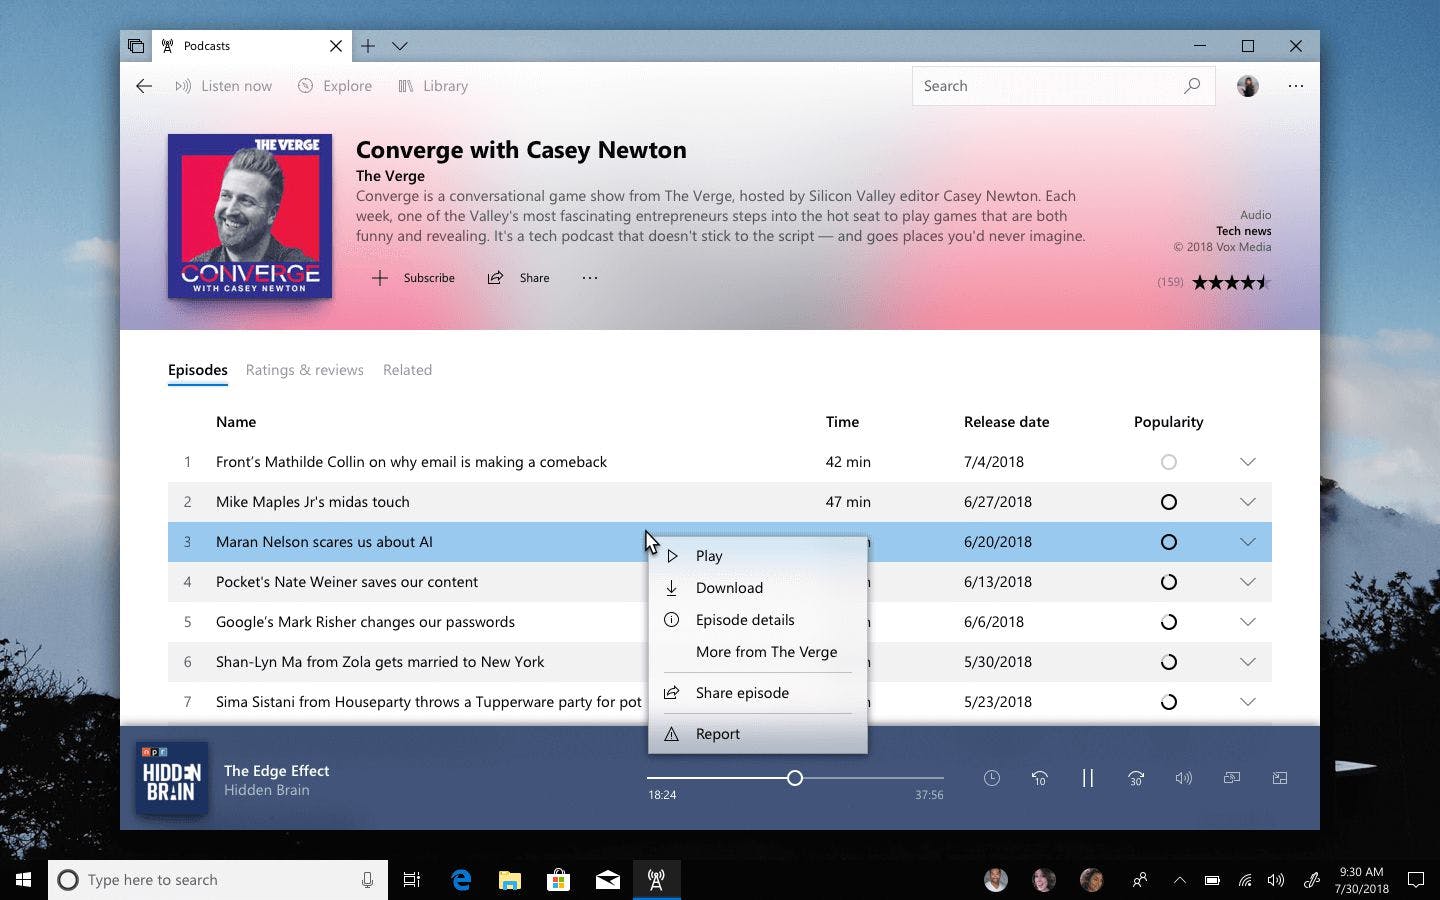 A podcast detail page, showing the context menu displayed when an episode is right-clicked.